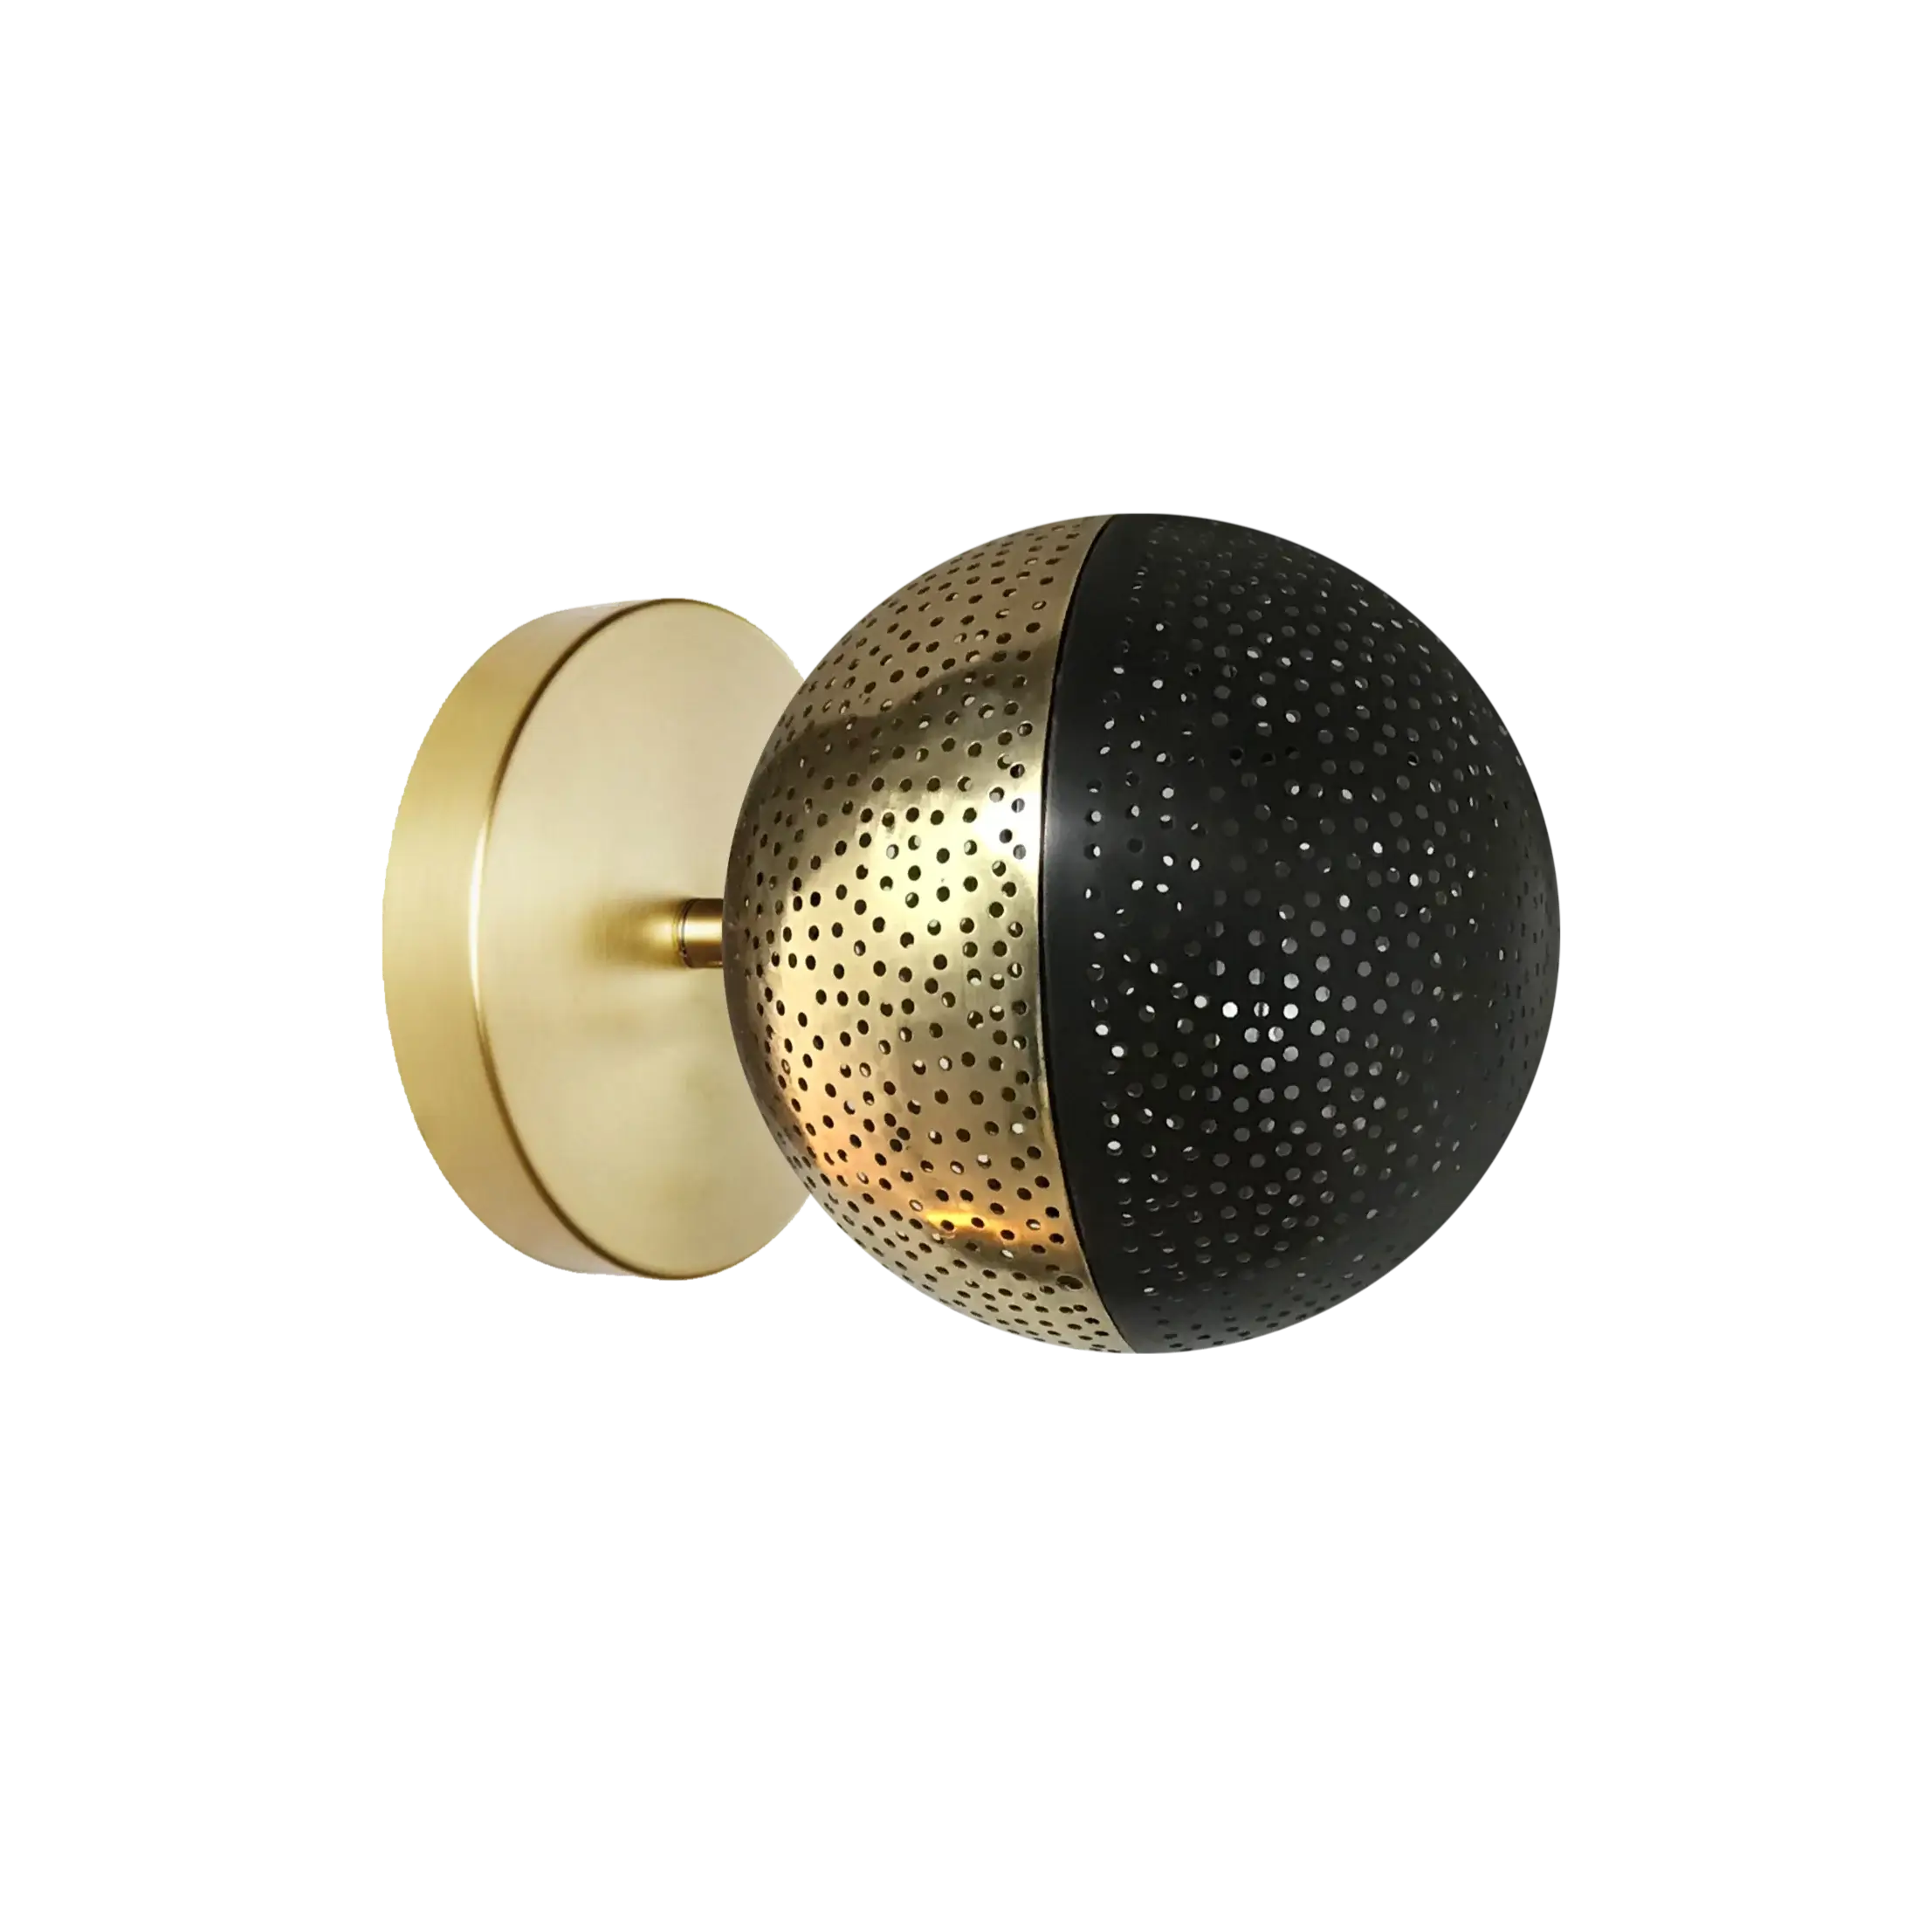 Dounia home Wall scone in Polished (brass/black) made of Metal, Model: Kora